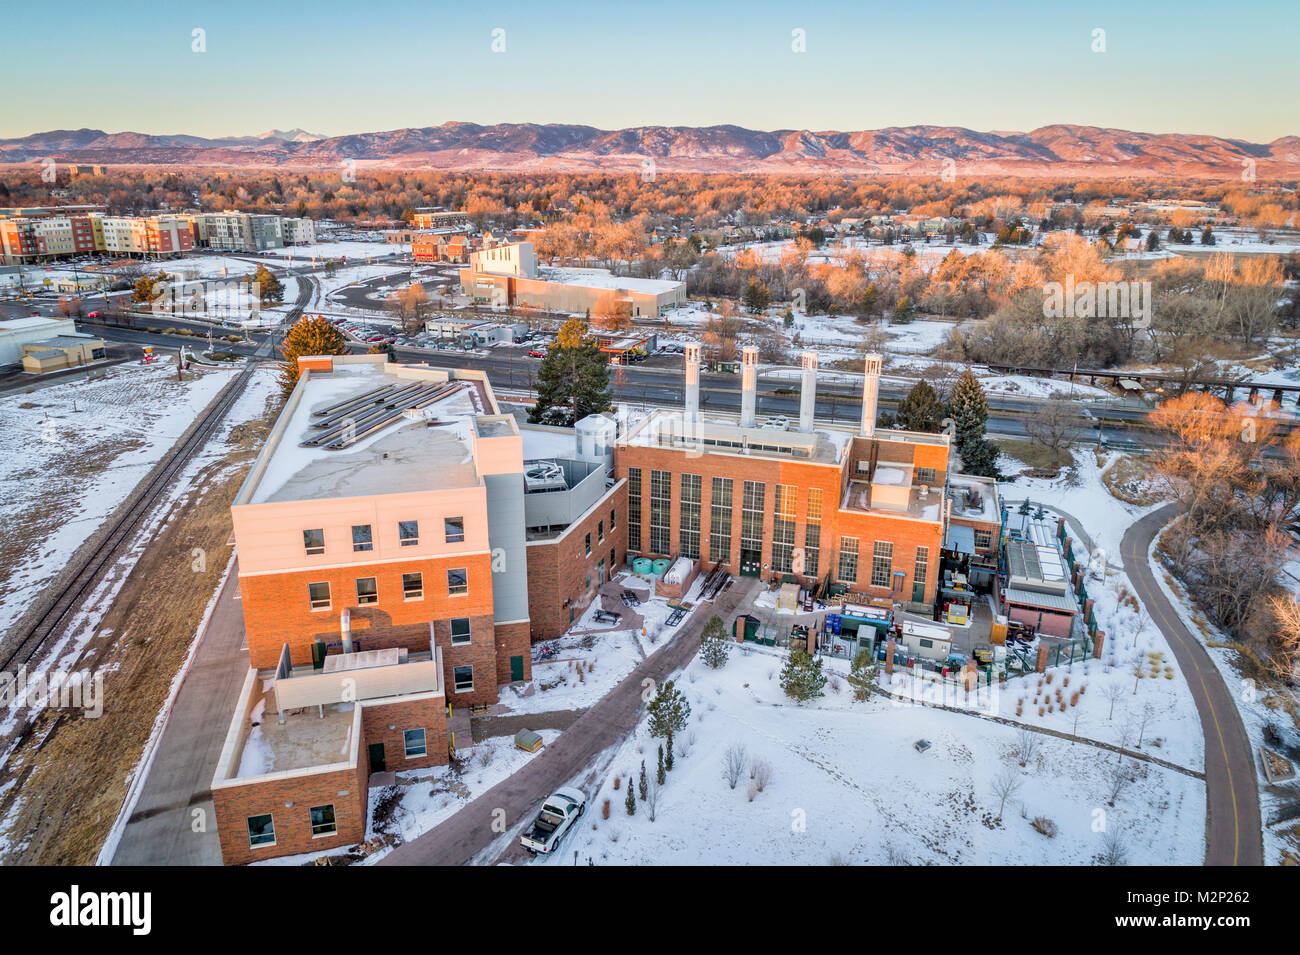 FORT COLLINS, CO, USA - DECEMBER 24, 2016: Powerhouse Energy Campus of Colorado State University - a new building completed in 2014 and historic Munic Stock Photo